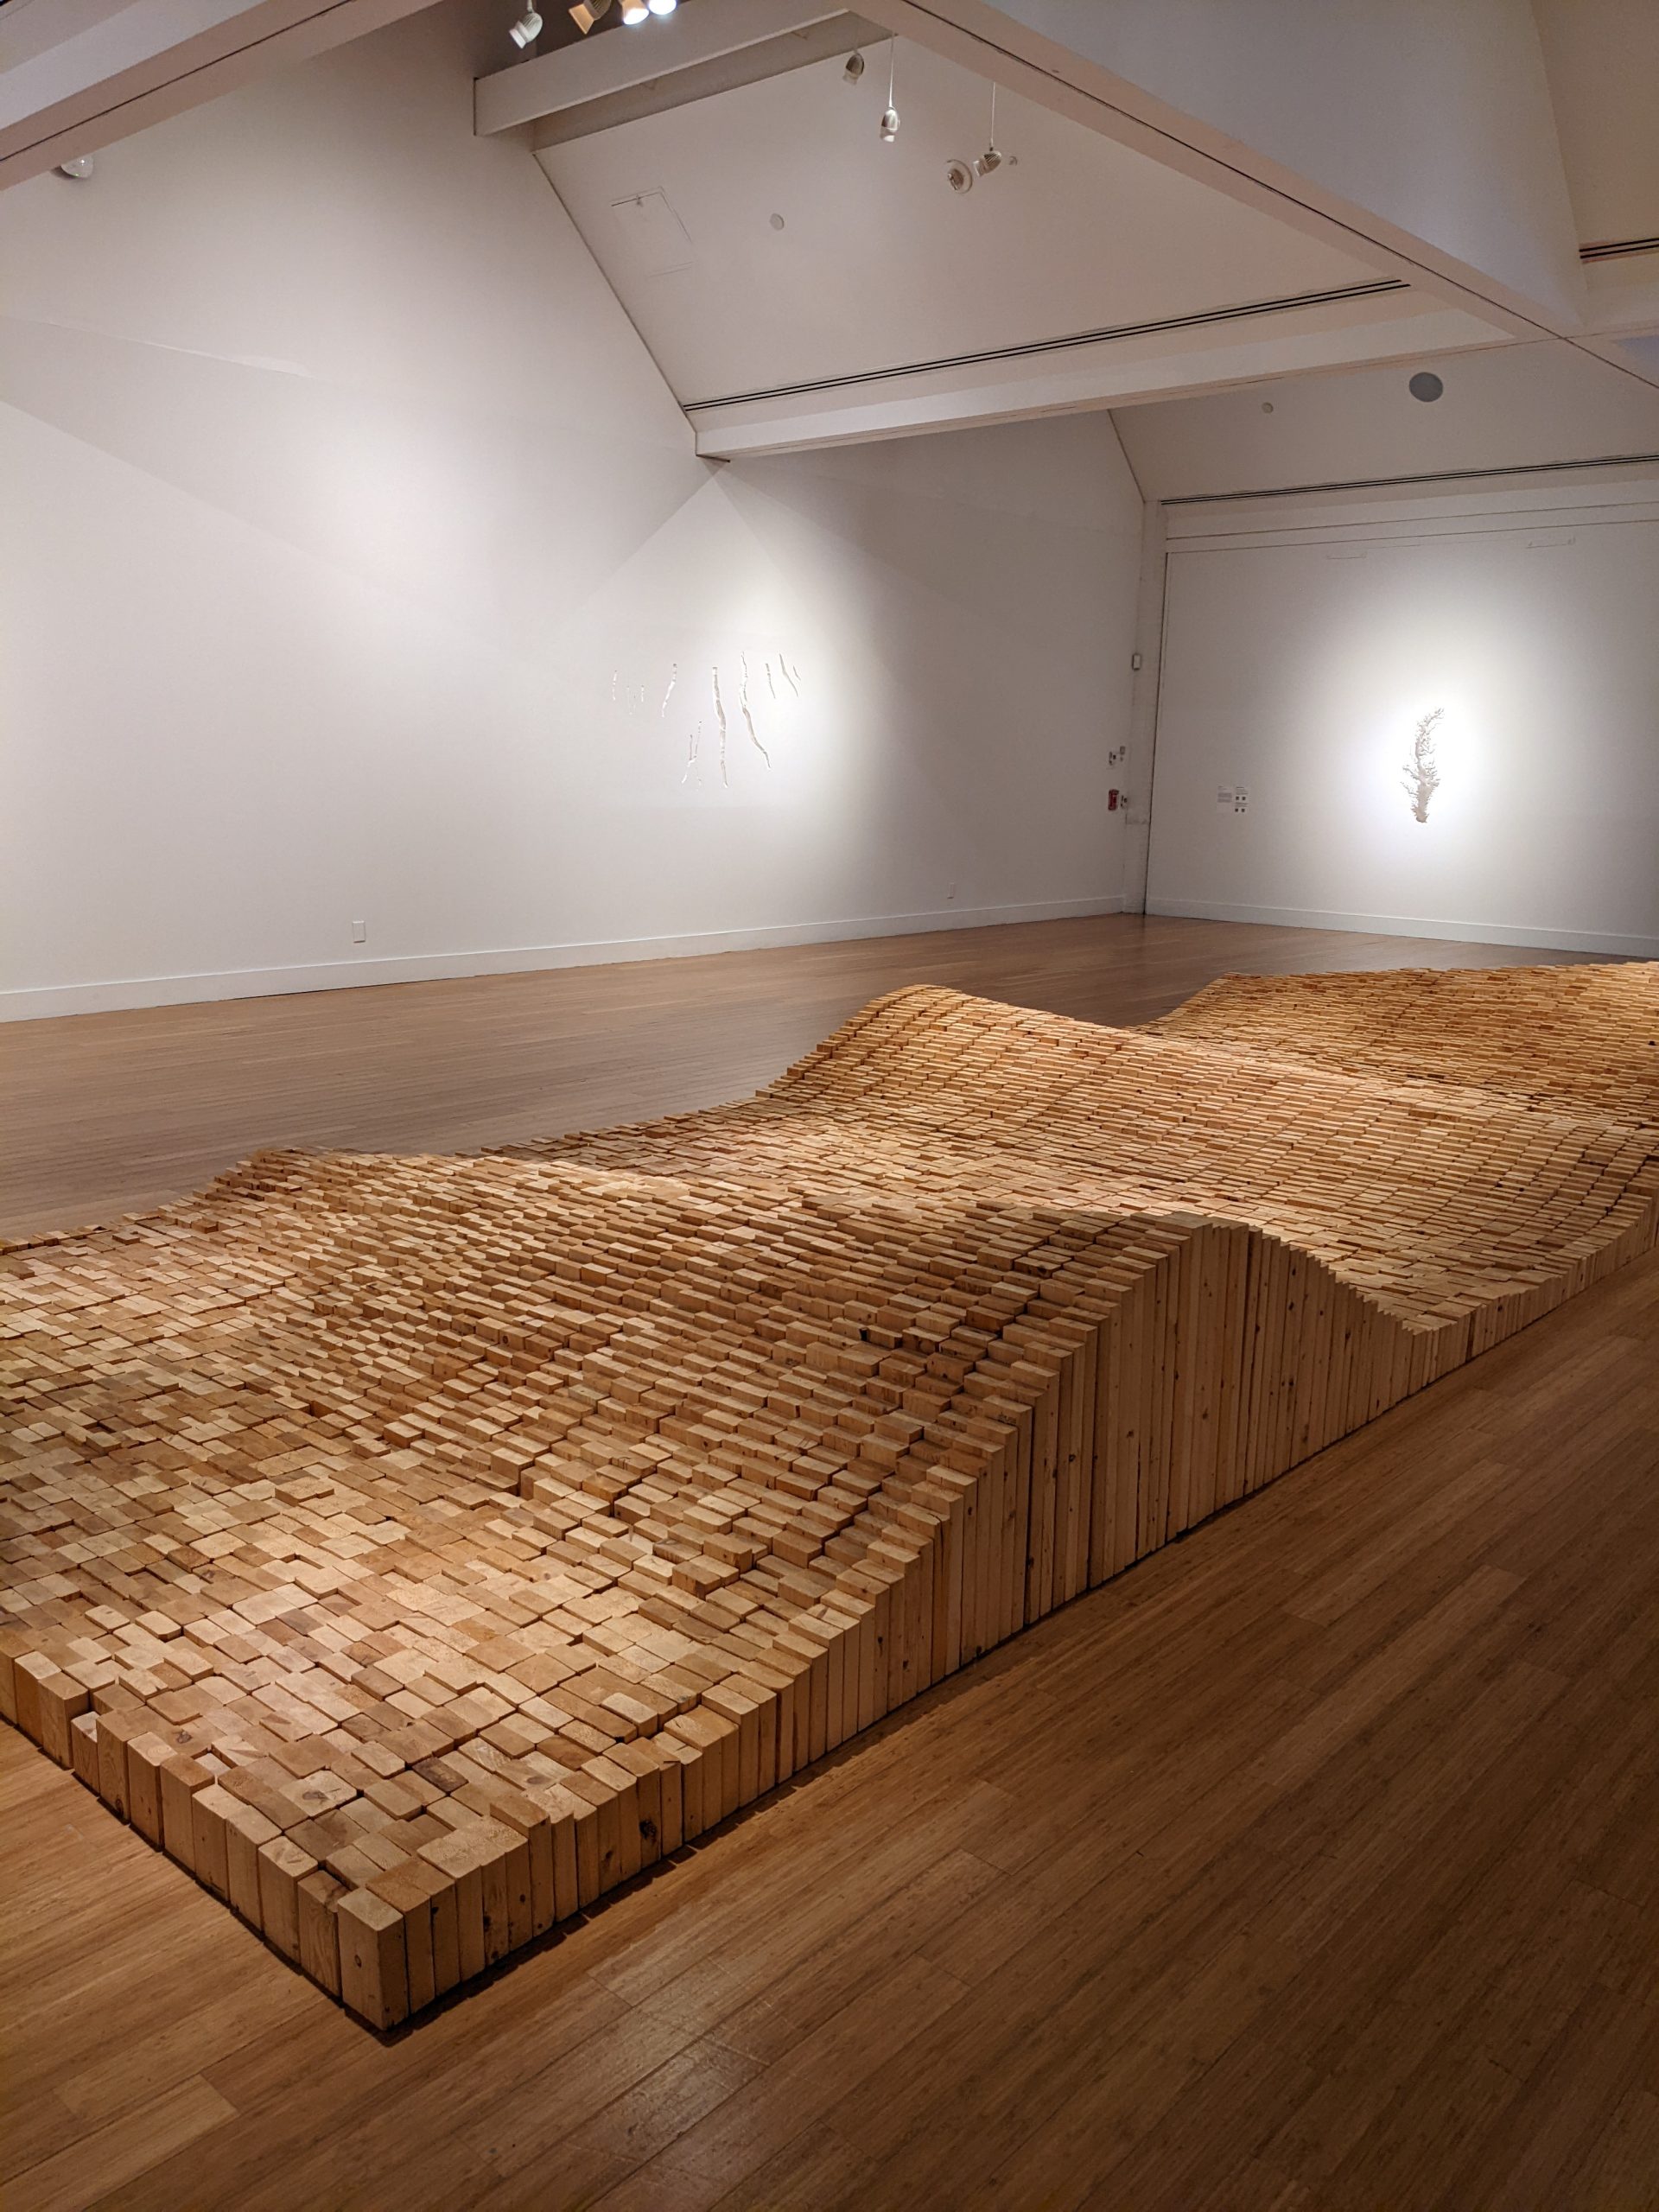 View of a gallery interior with a sculpture made of sections of unfinished 2 x 4 wood timbers cut at different heights to create a wave-length effect. The sculpture is set directly on the hardwood floor.